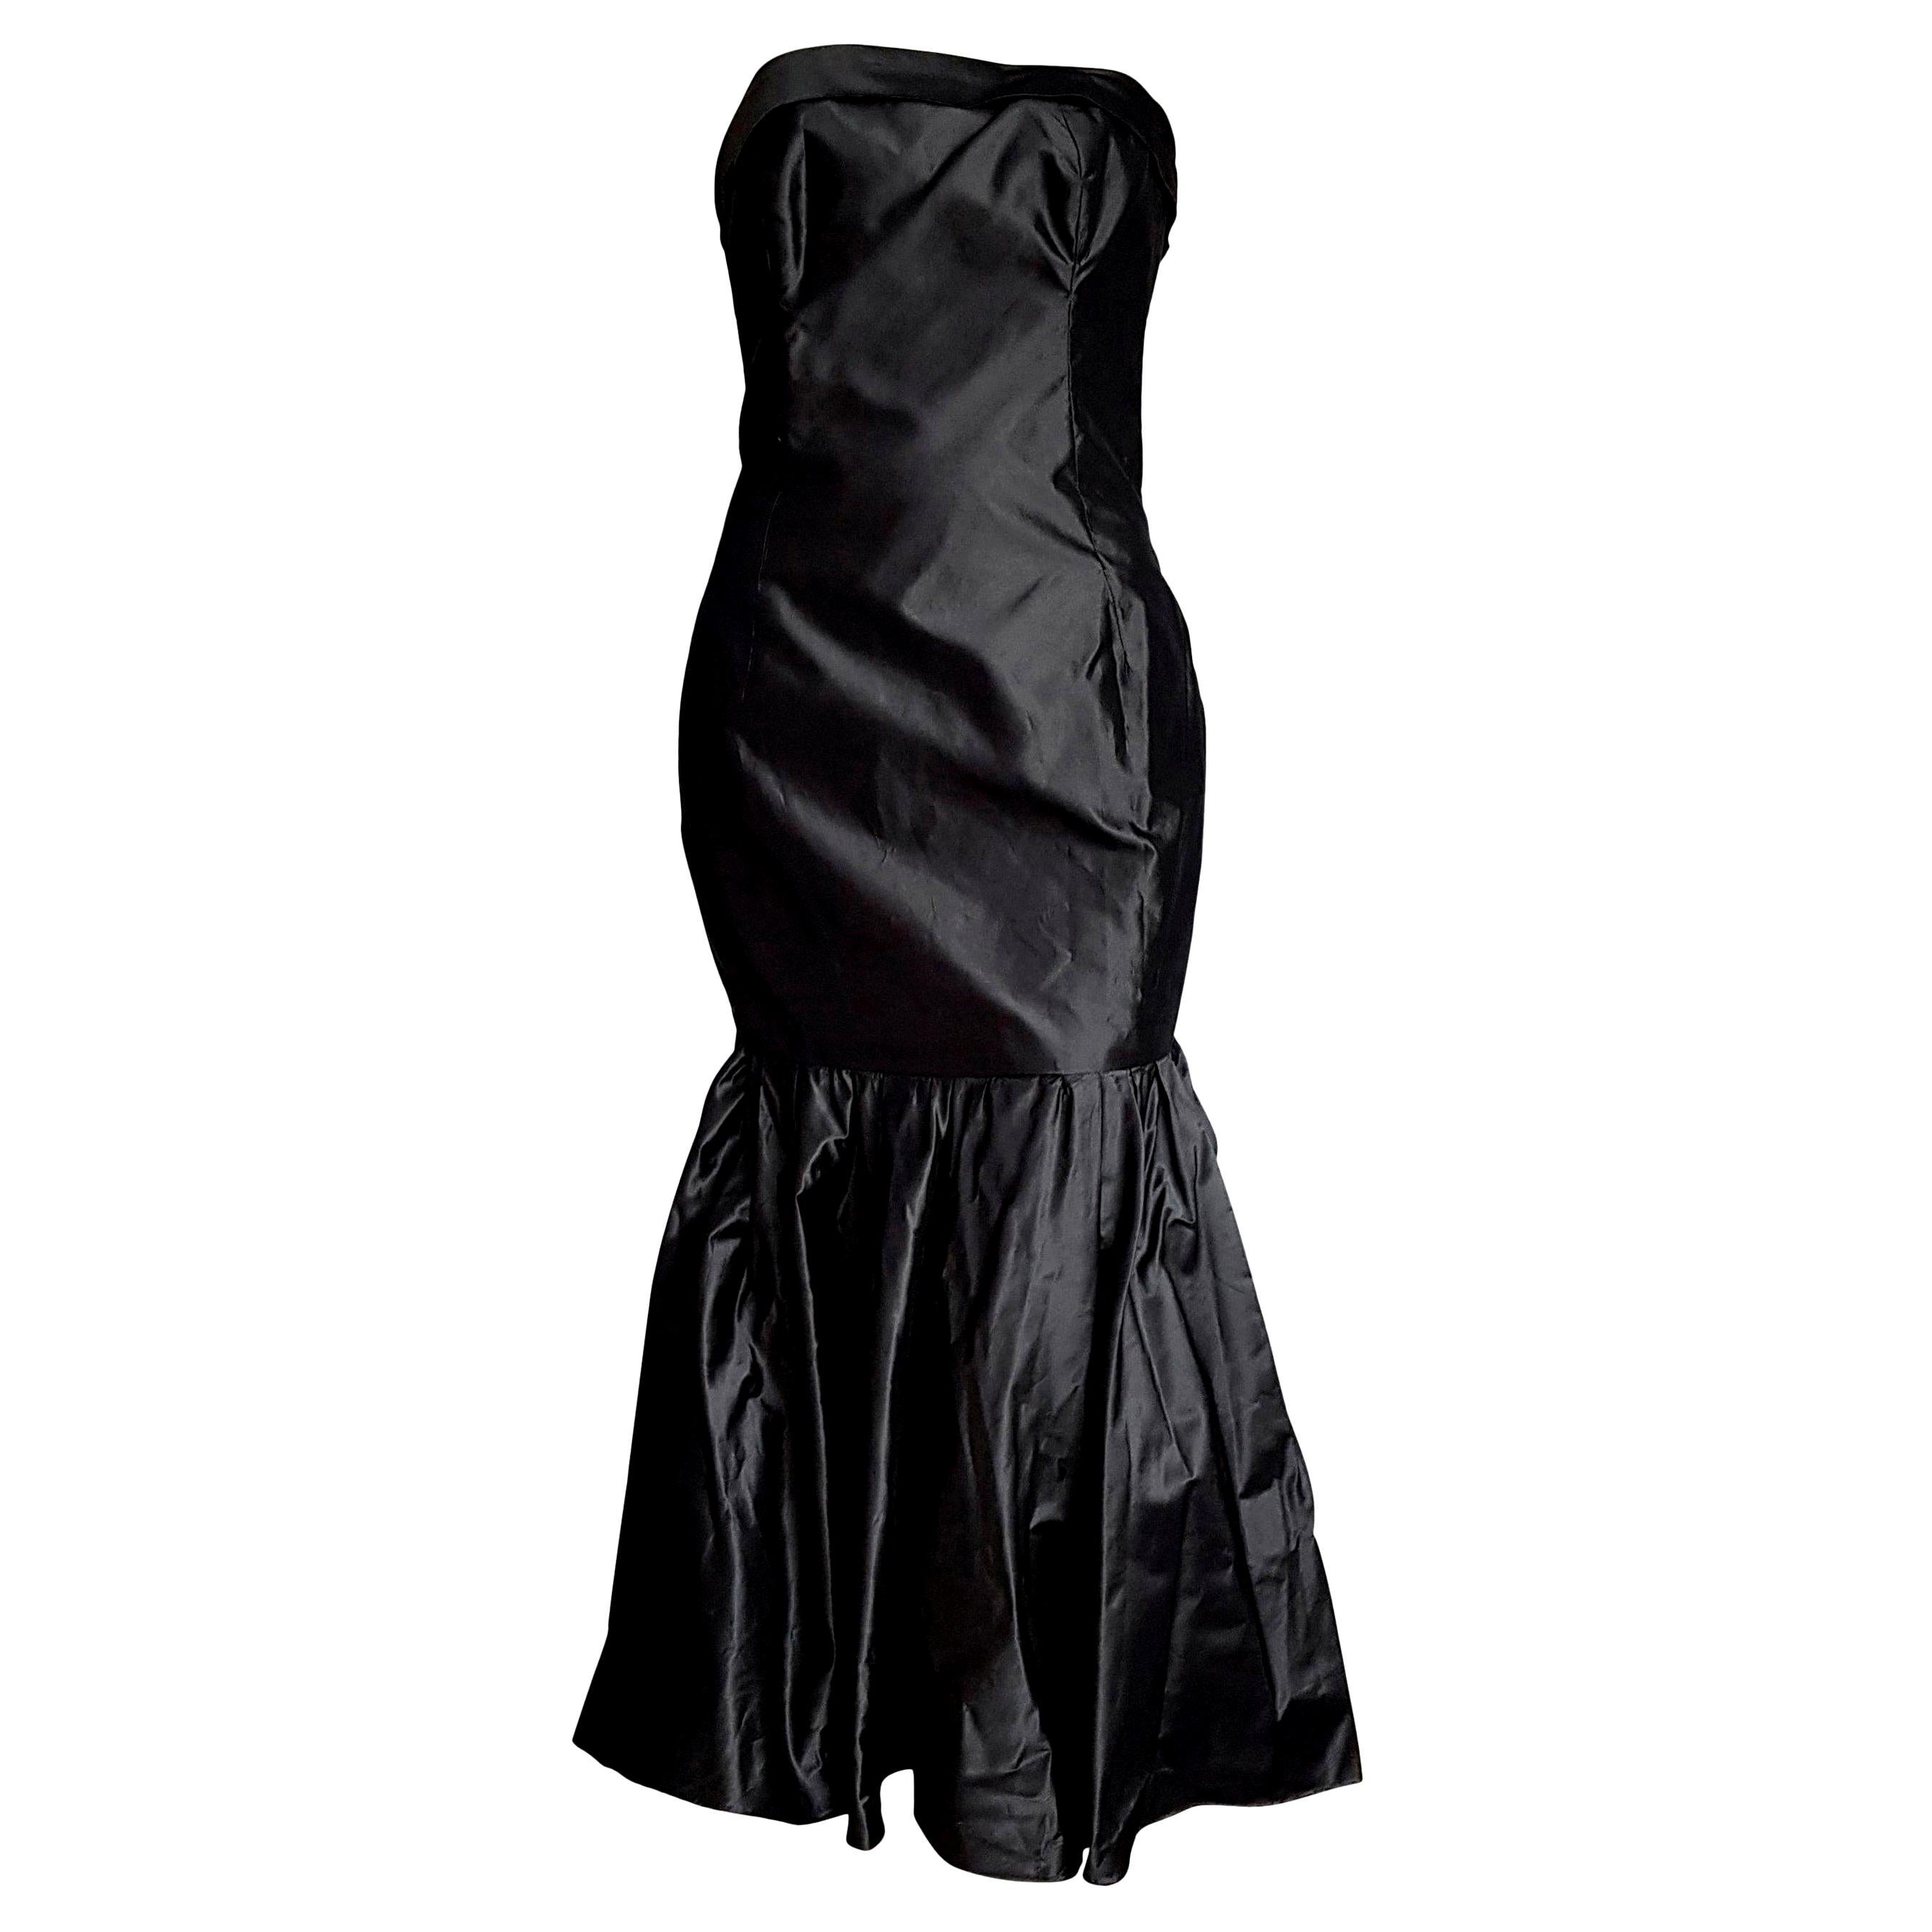 CHANEL "New" Haute Couture Strapless Anthracite Silk Gown - Unworn For Sale